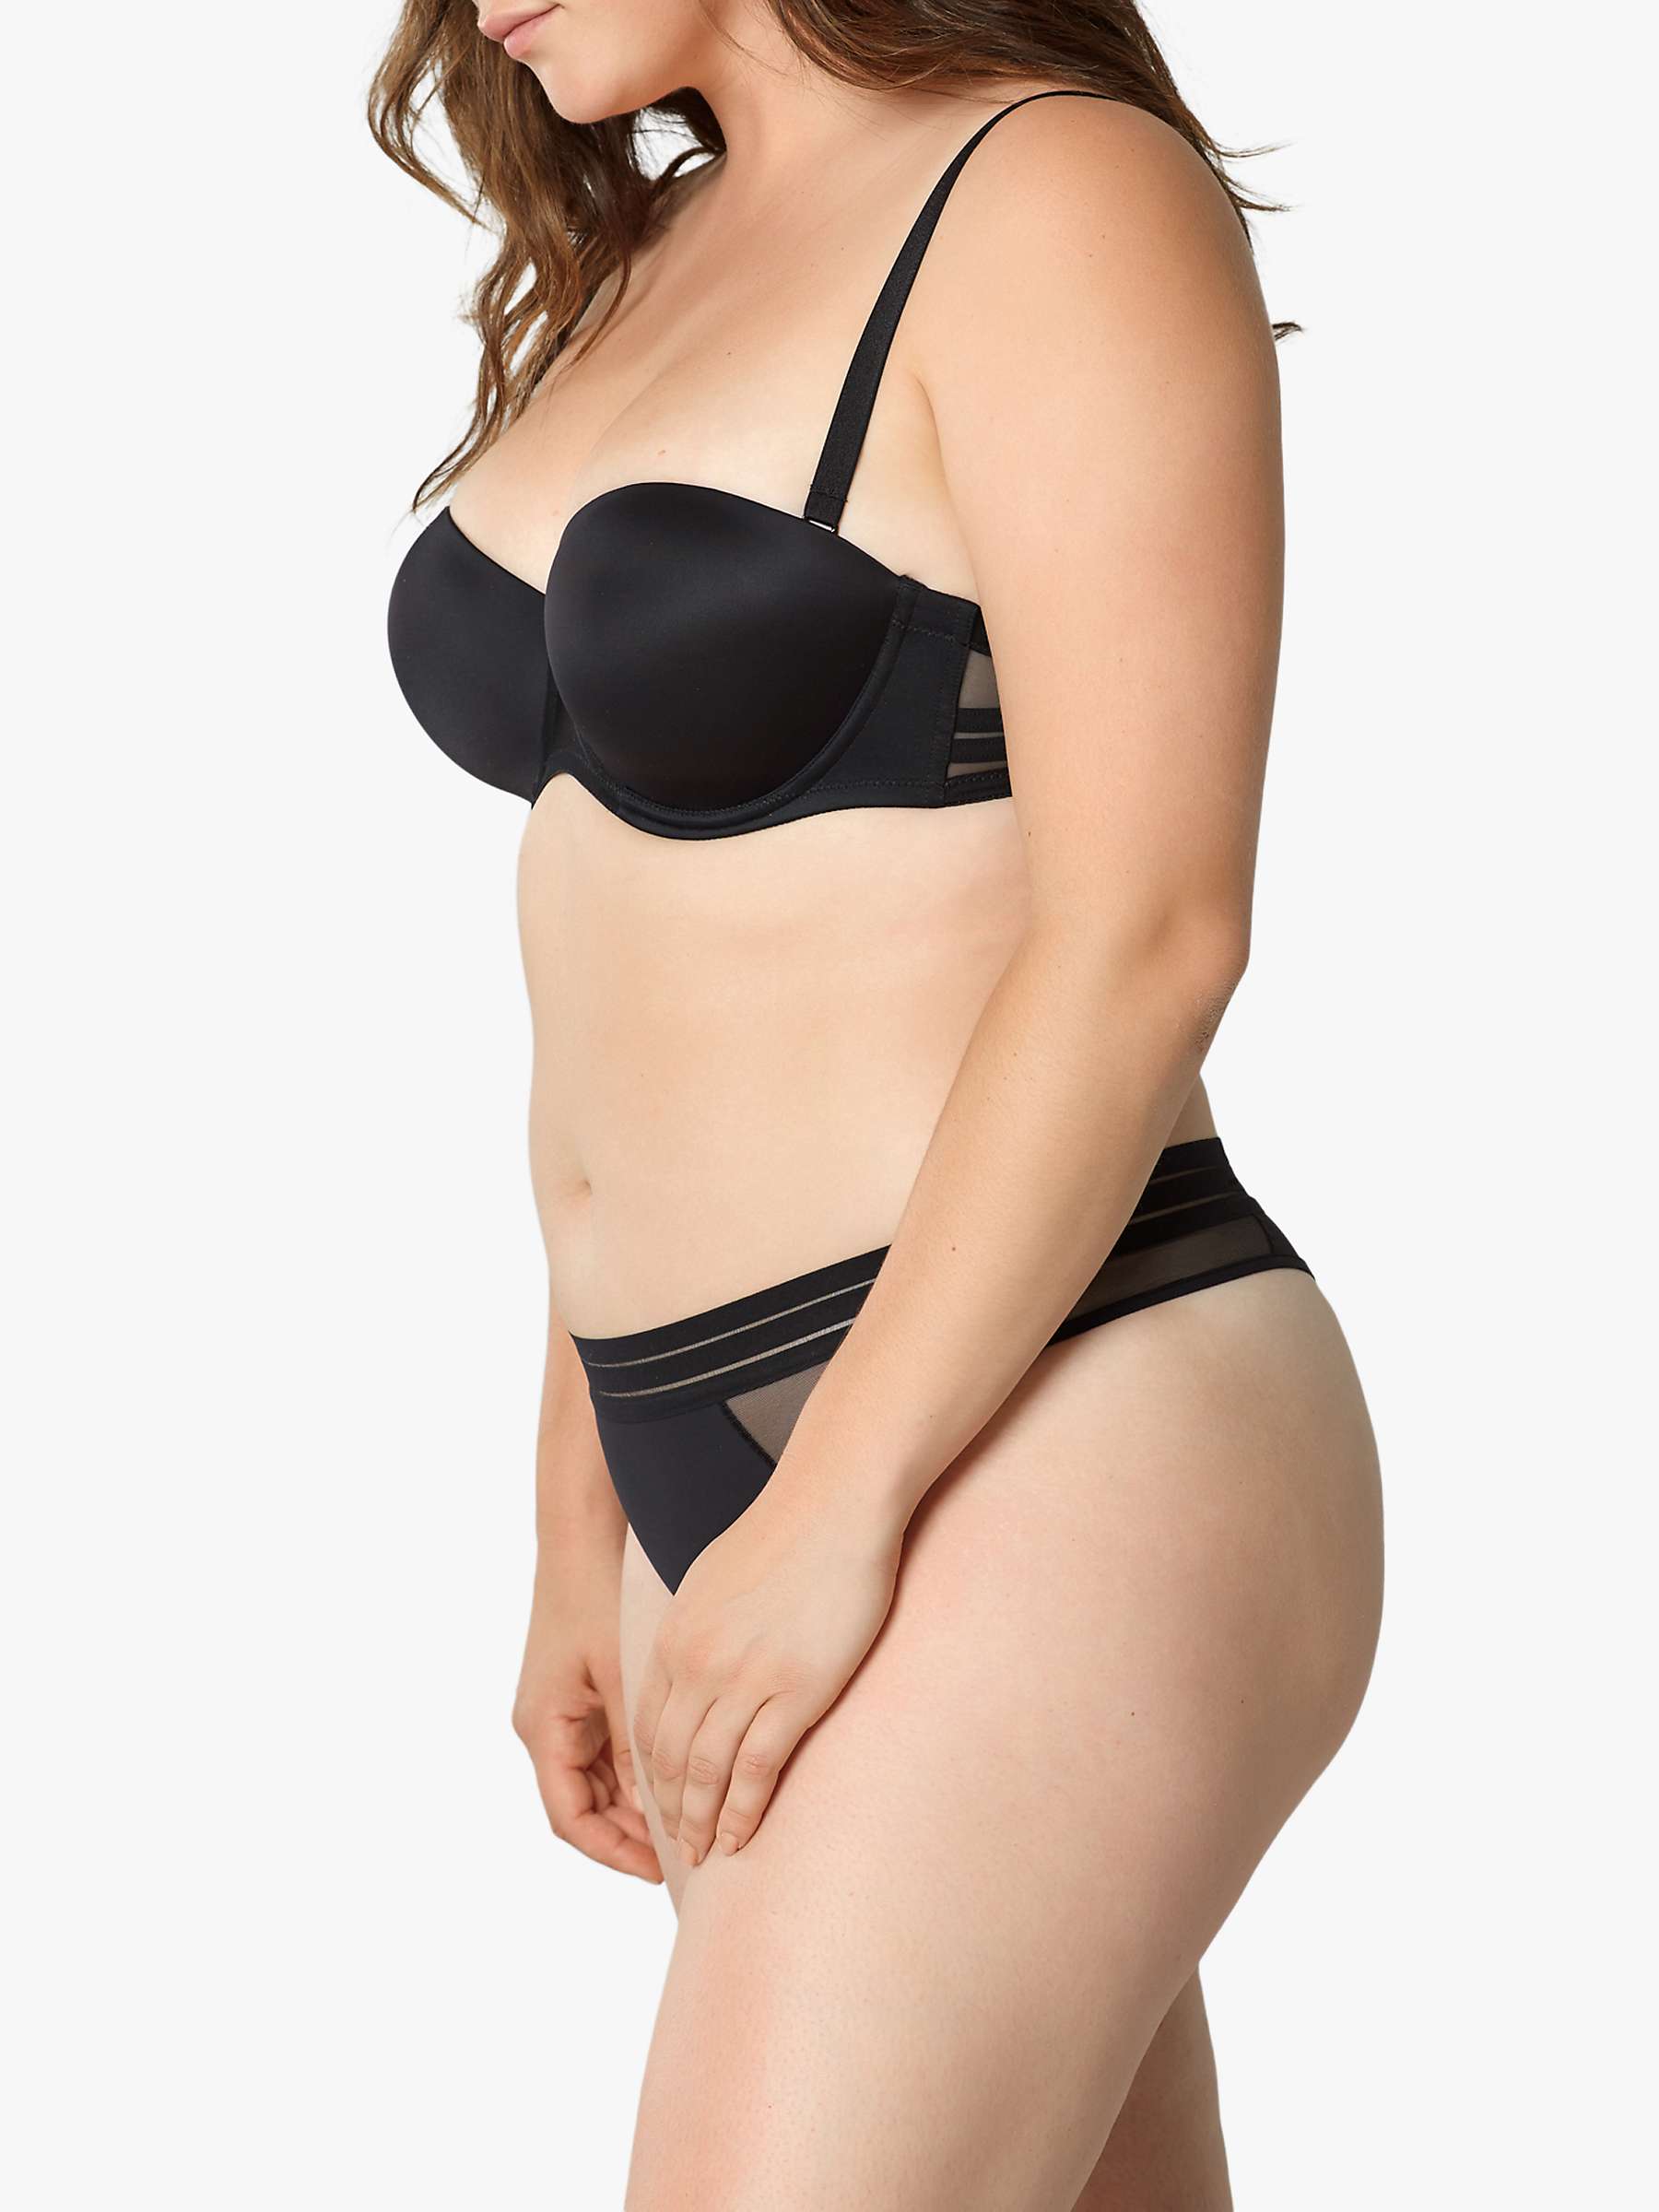 Buy Maison Lejaby Nufit Tanga Knickers Online at johnlewis.com